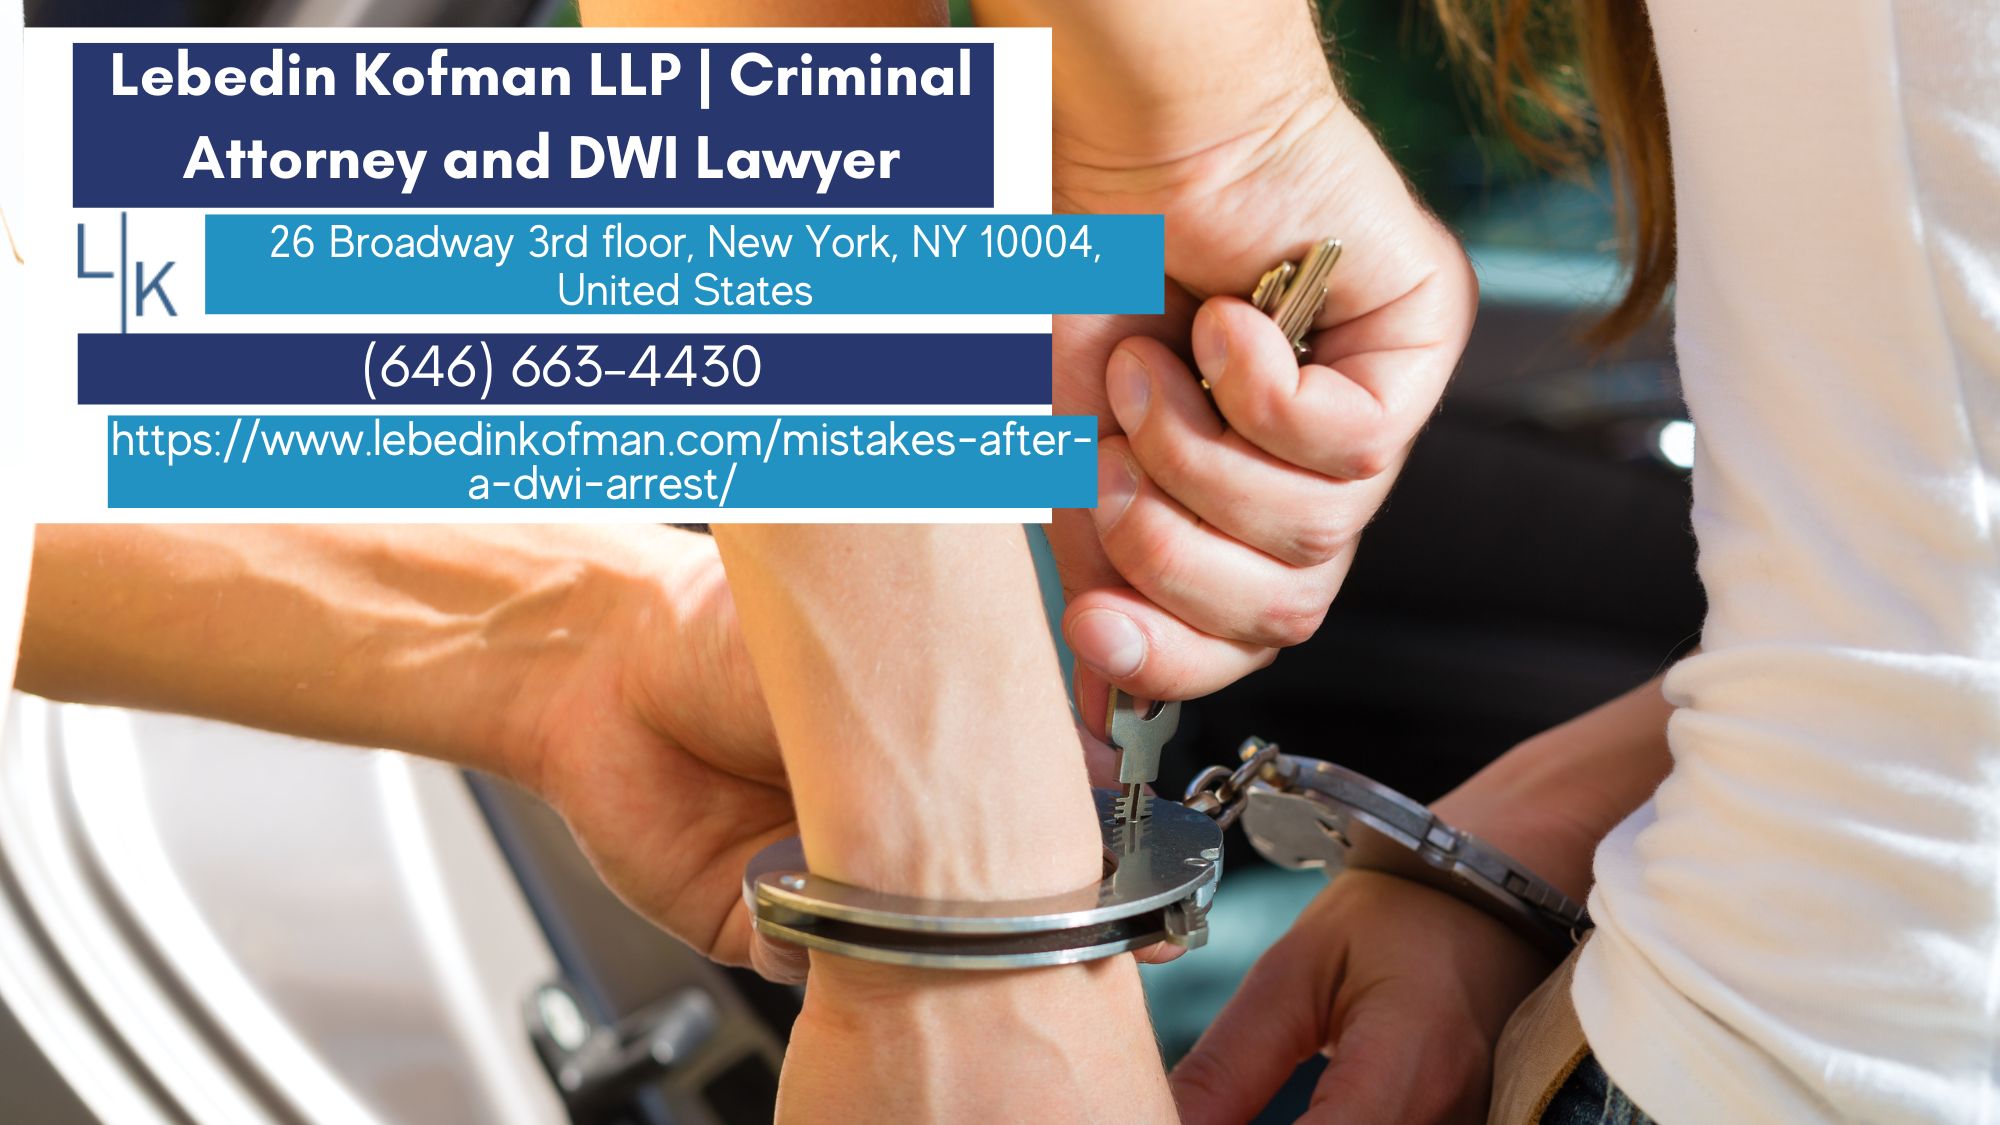 Manhattan DWI Lawyer Russ Kofman Highlights Common Mistakes Made After a DWI Arrest in New Article